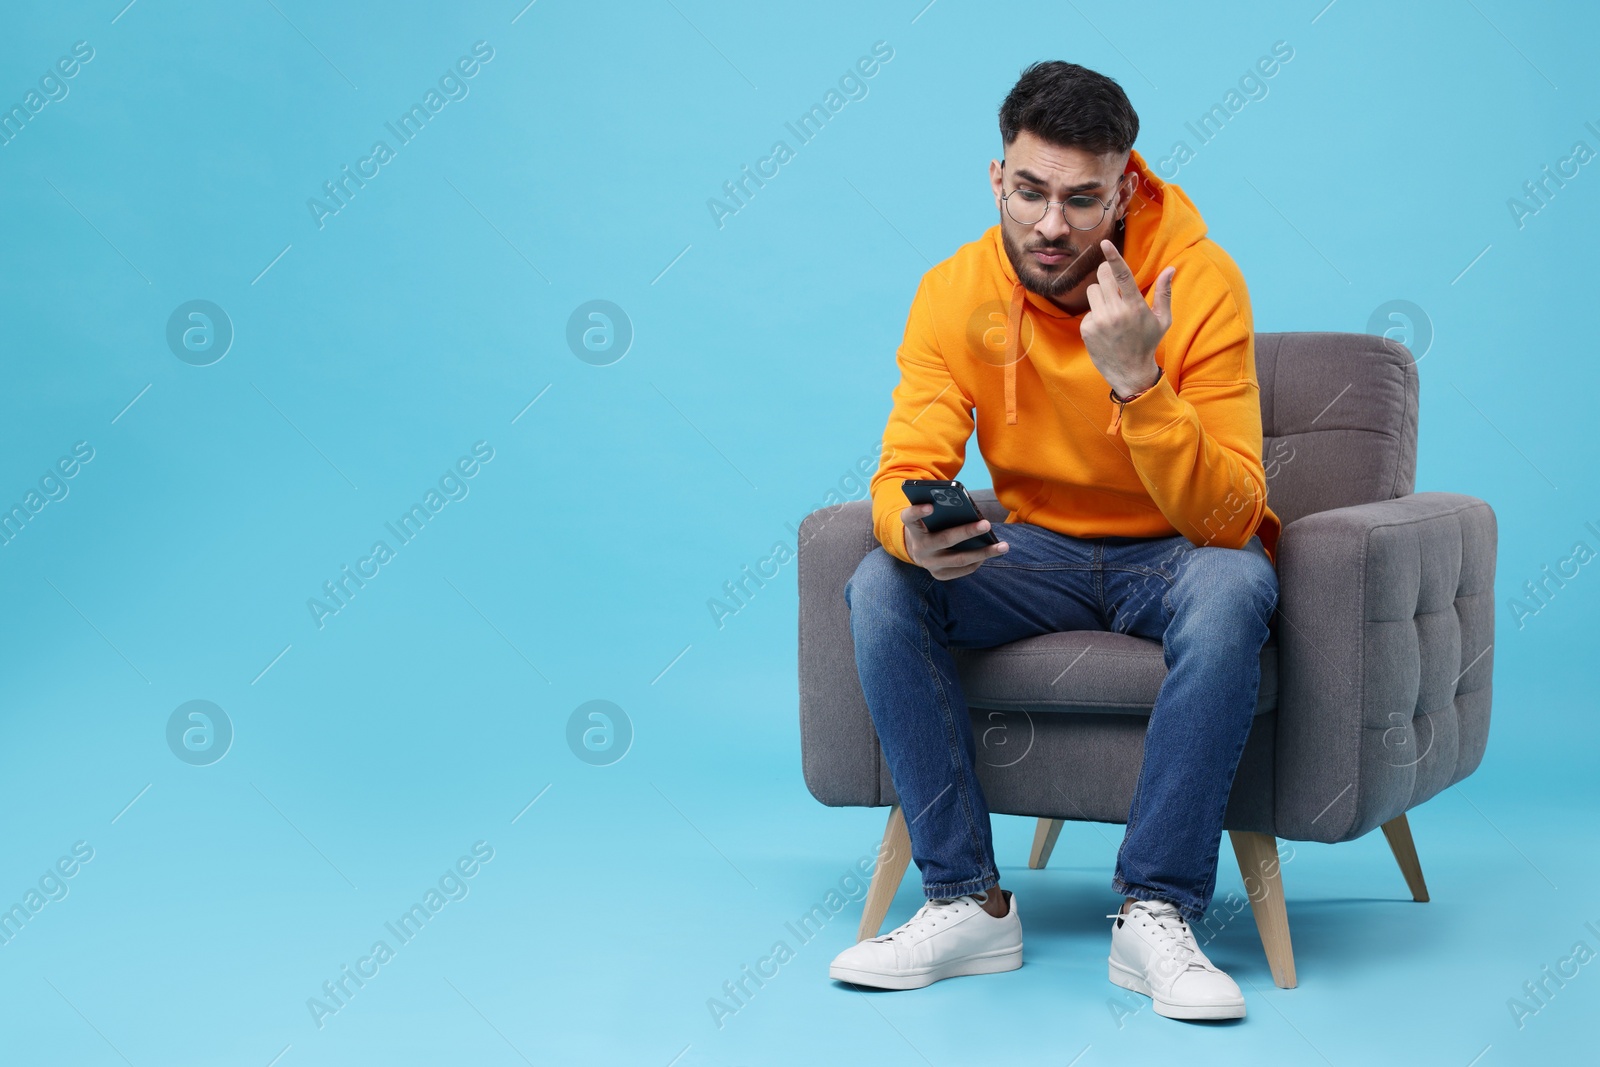 Photo of Emotional young man using smartphone on armchair against light blue background, space for text